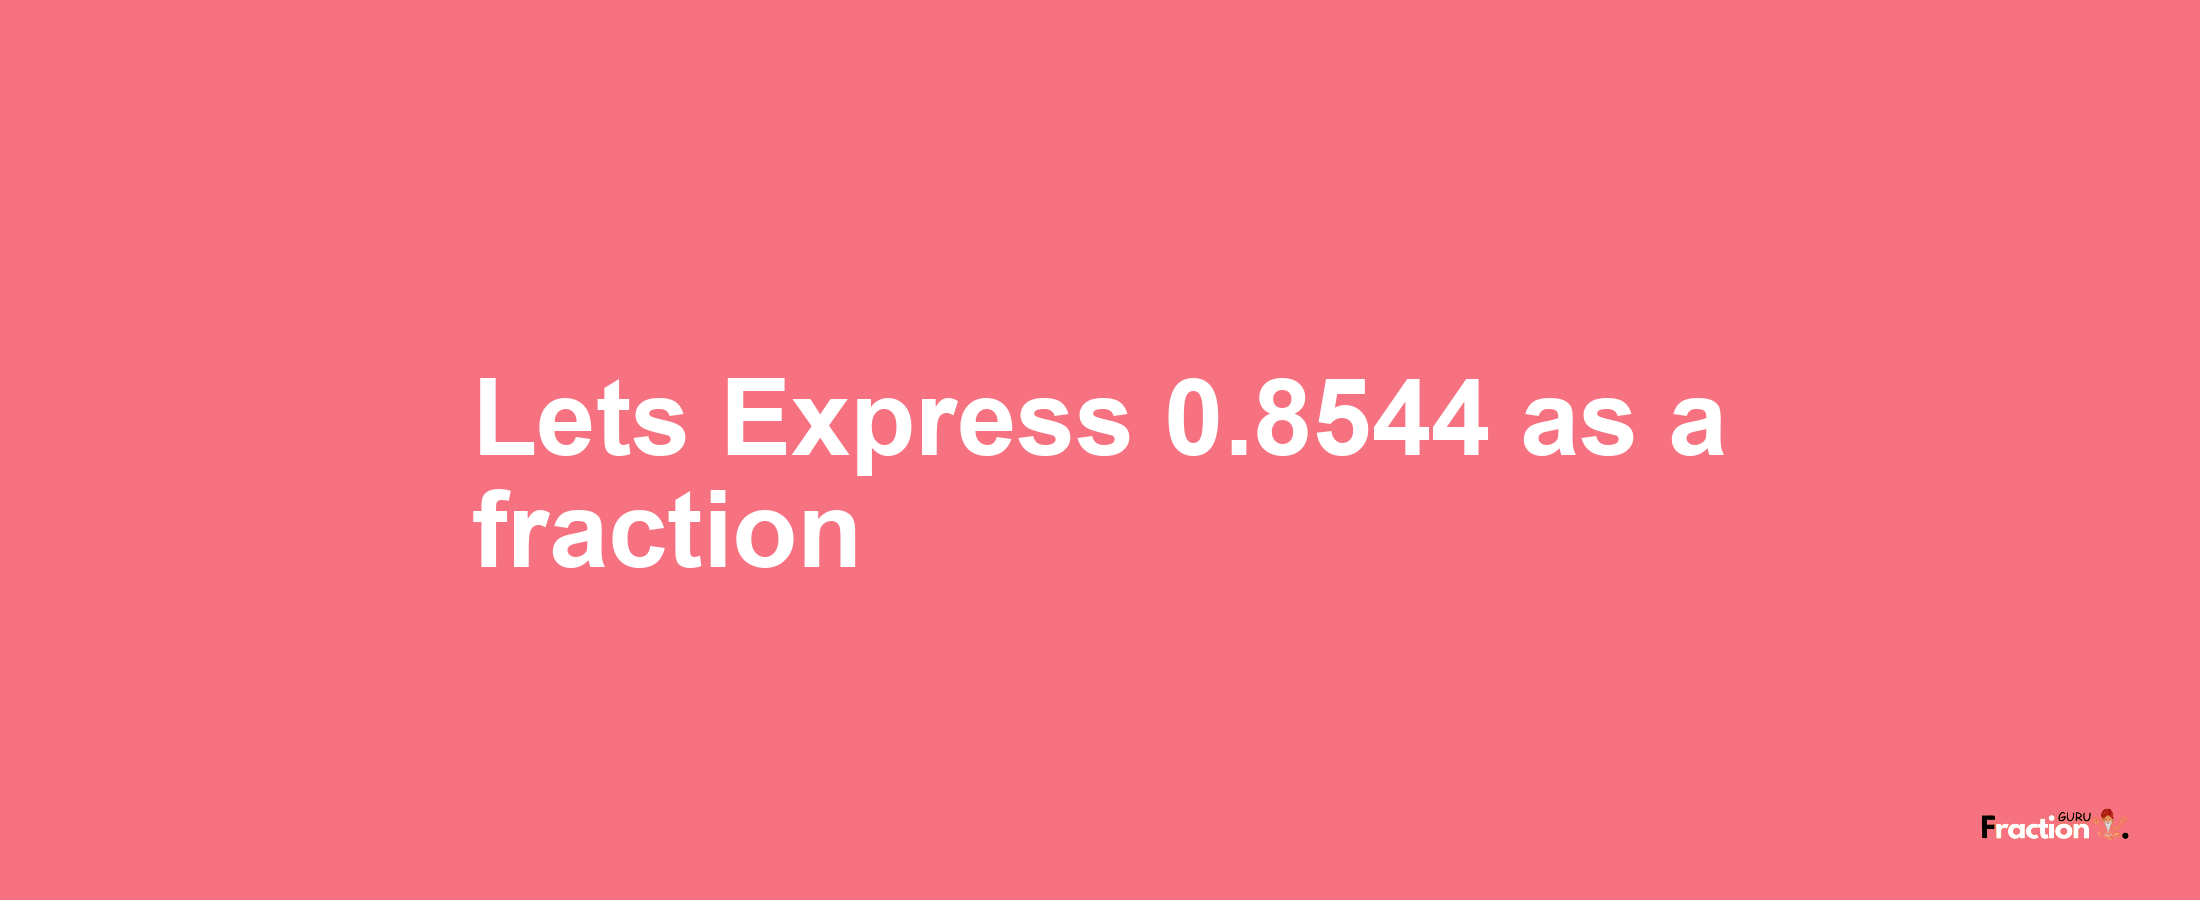 Lets Express 0.8544 as afraction